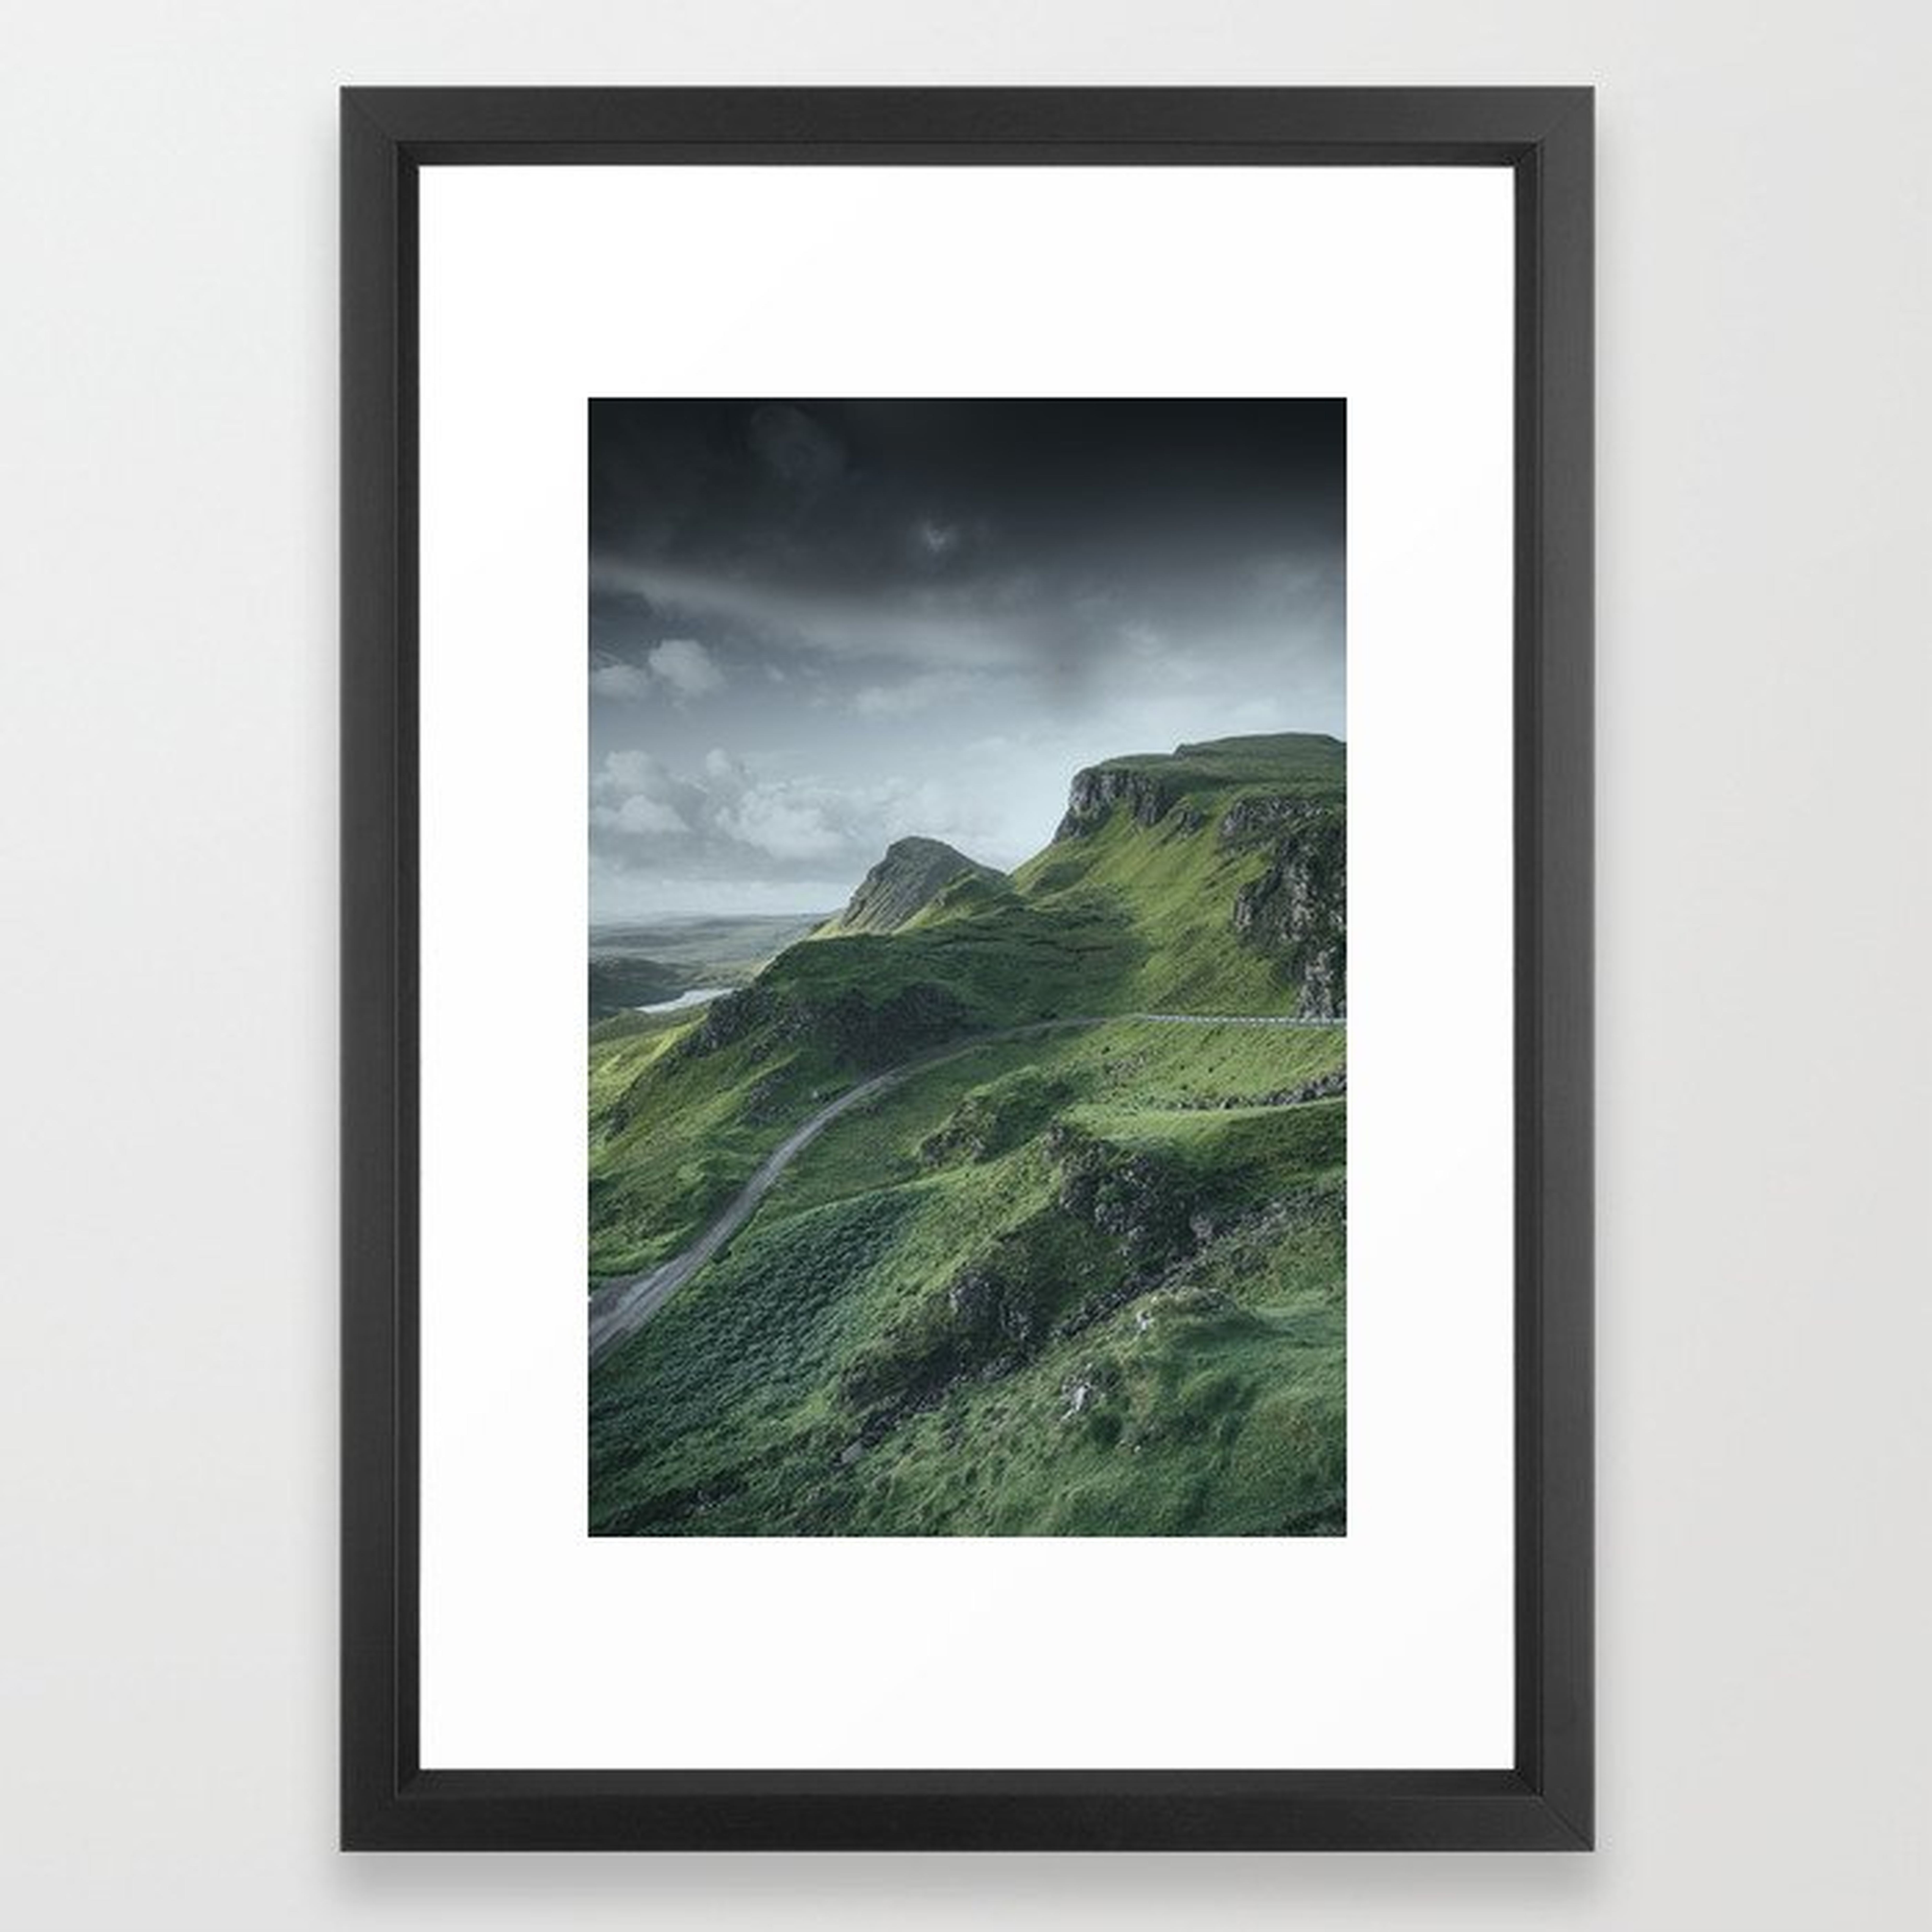 Up in the Clouds Framed Art Print by David Lichtneker - Society6